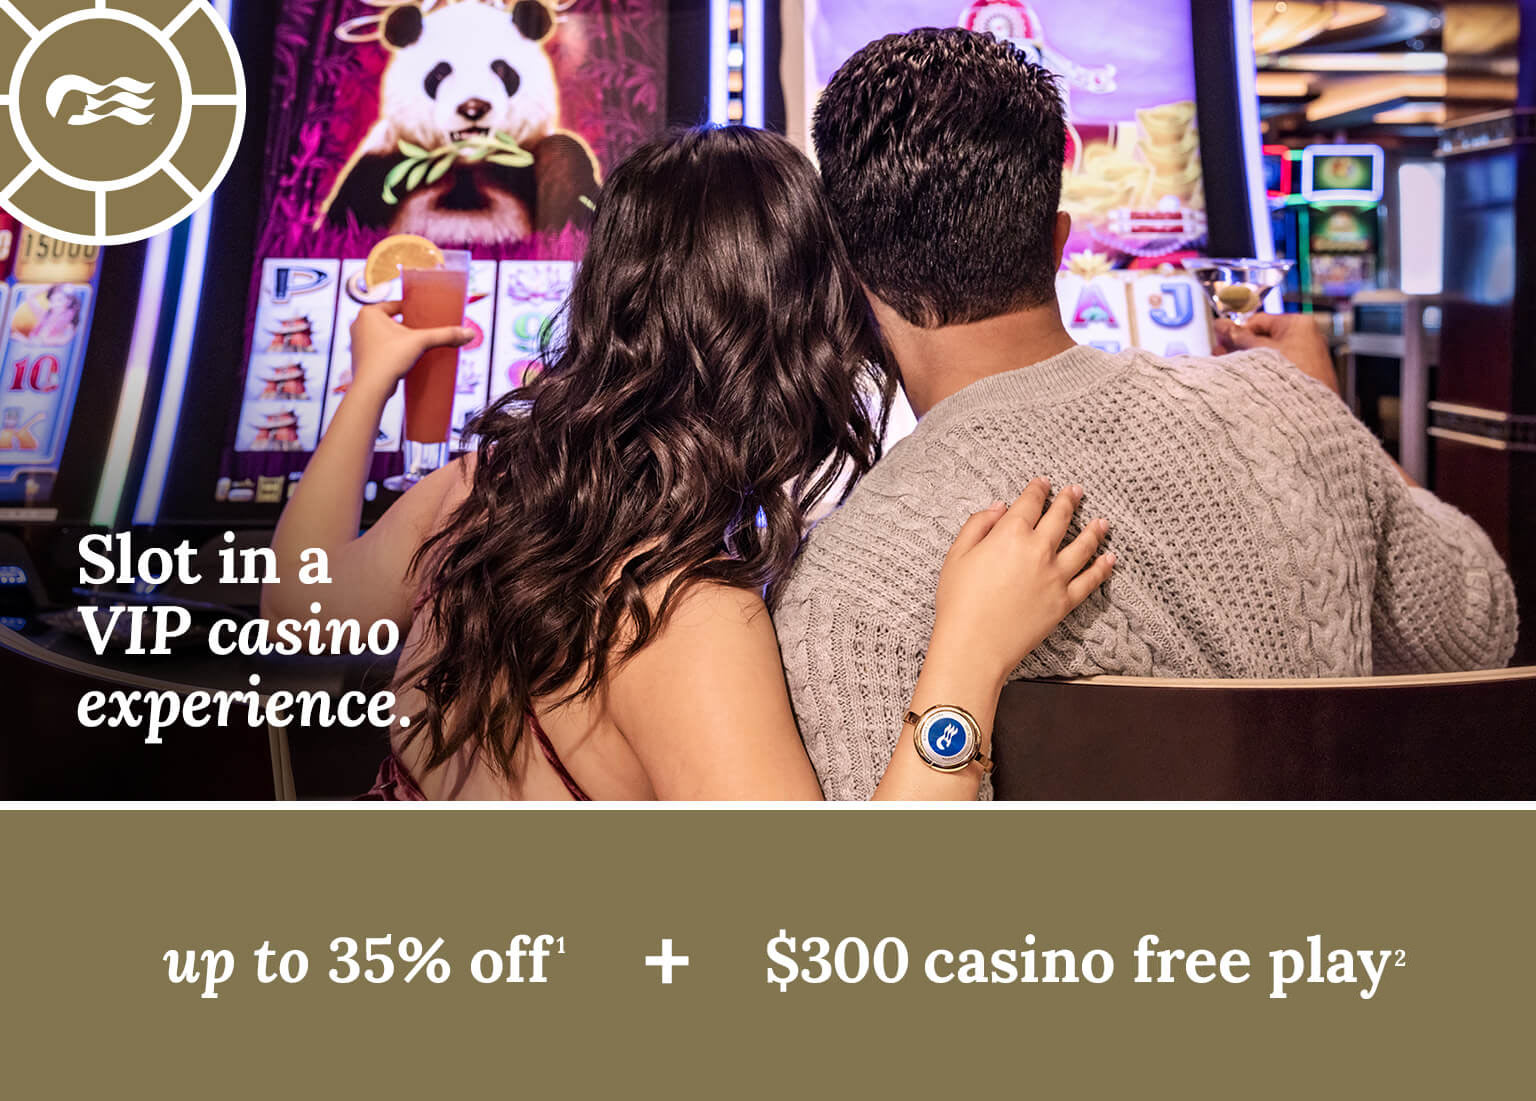 Slot in a VIP casino experience. Up to 35% off + $300 casino free play. Click here to book.